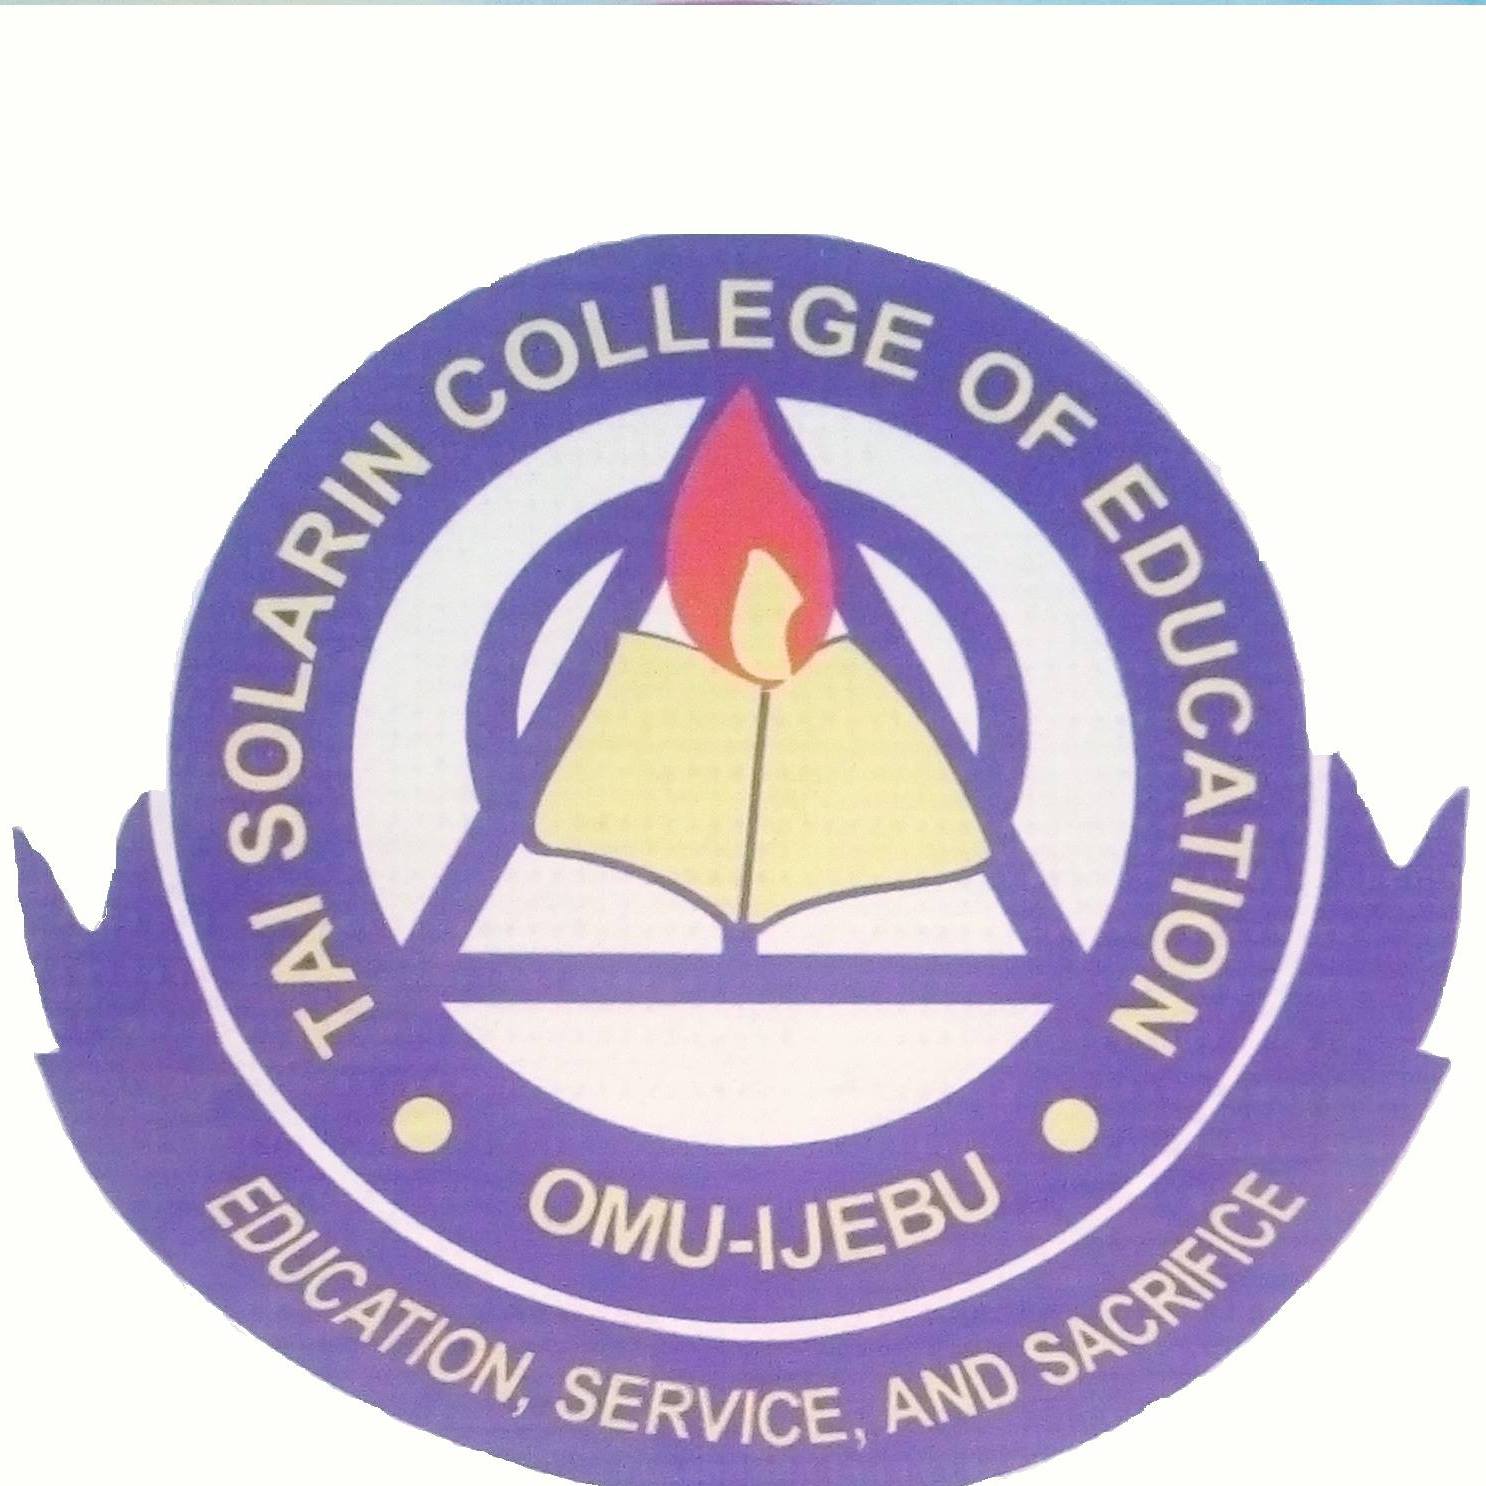 TASCE Foundation, Remedial, Sandwich & Preliminary Studies Admission Forms 2019/2020